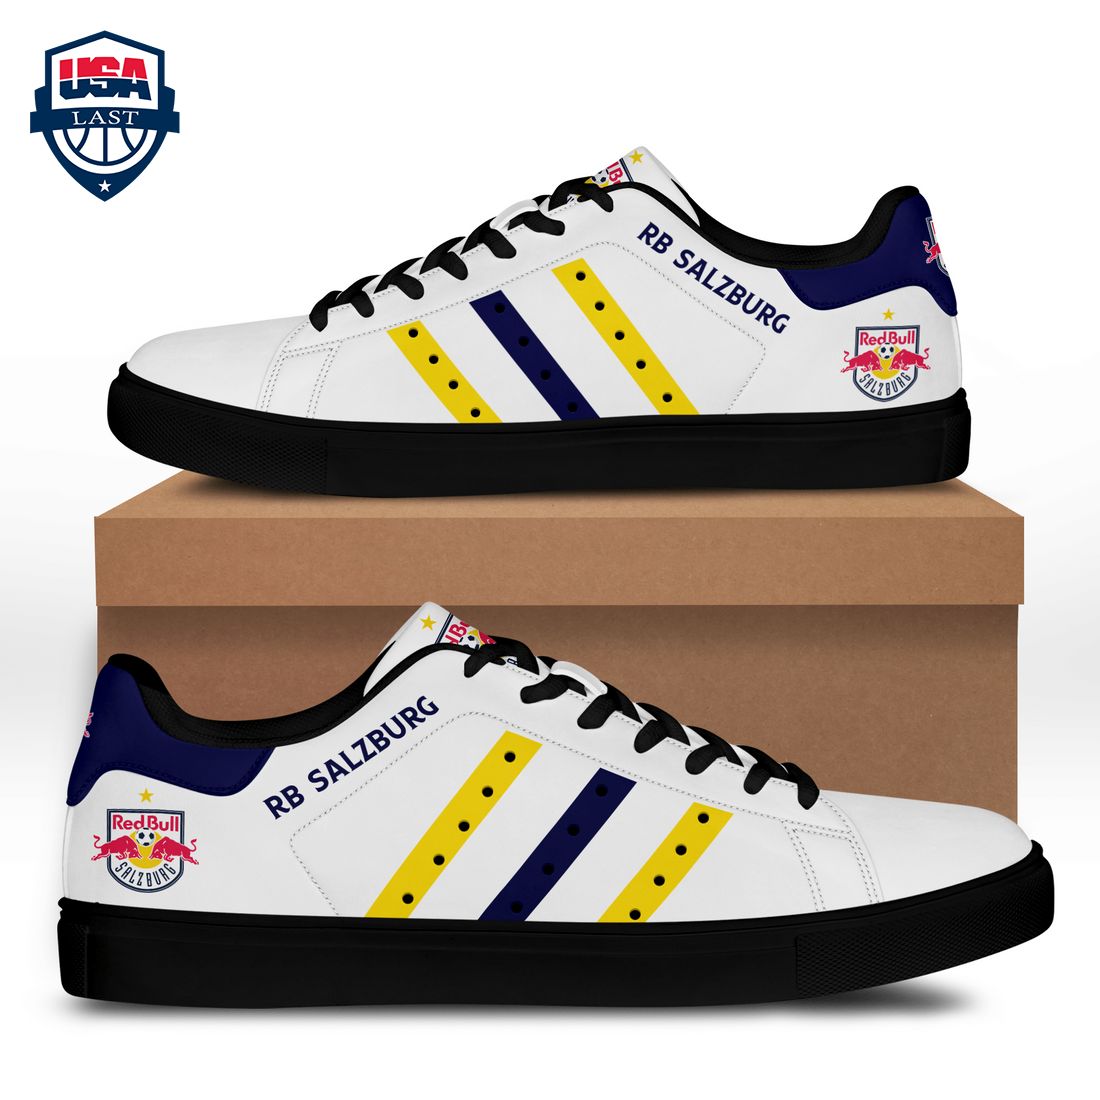 fc-red-bull-salzburg-yellow-navy-stripes-stan-smith-low-top-shoes-1-pAPdg.jpg